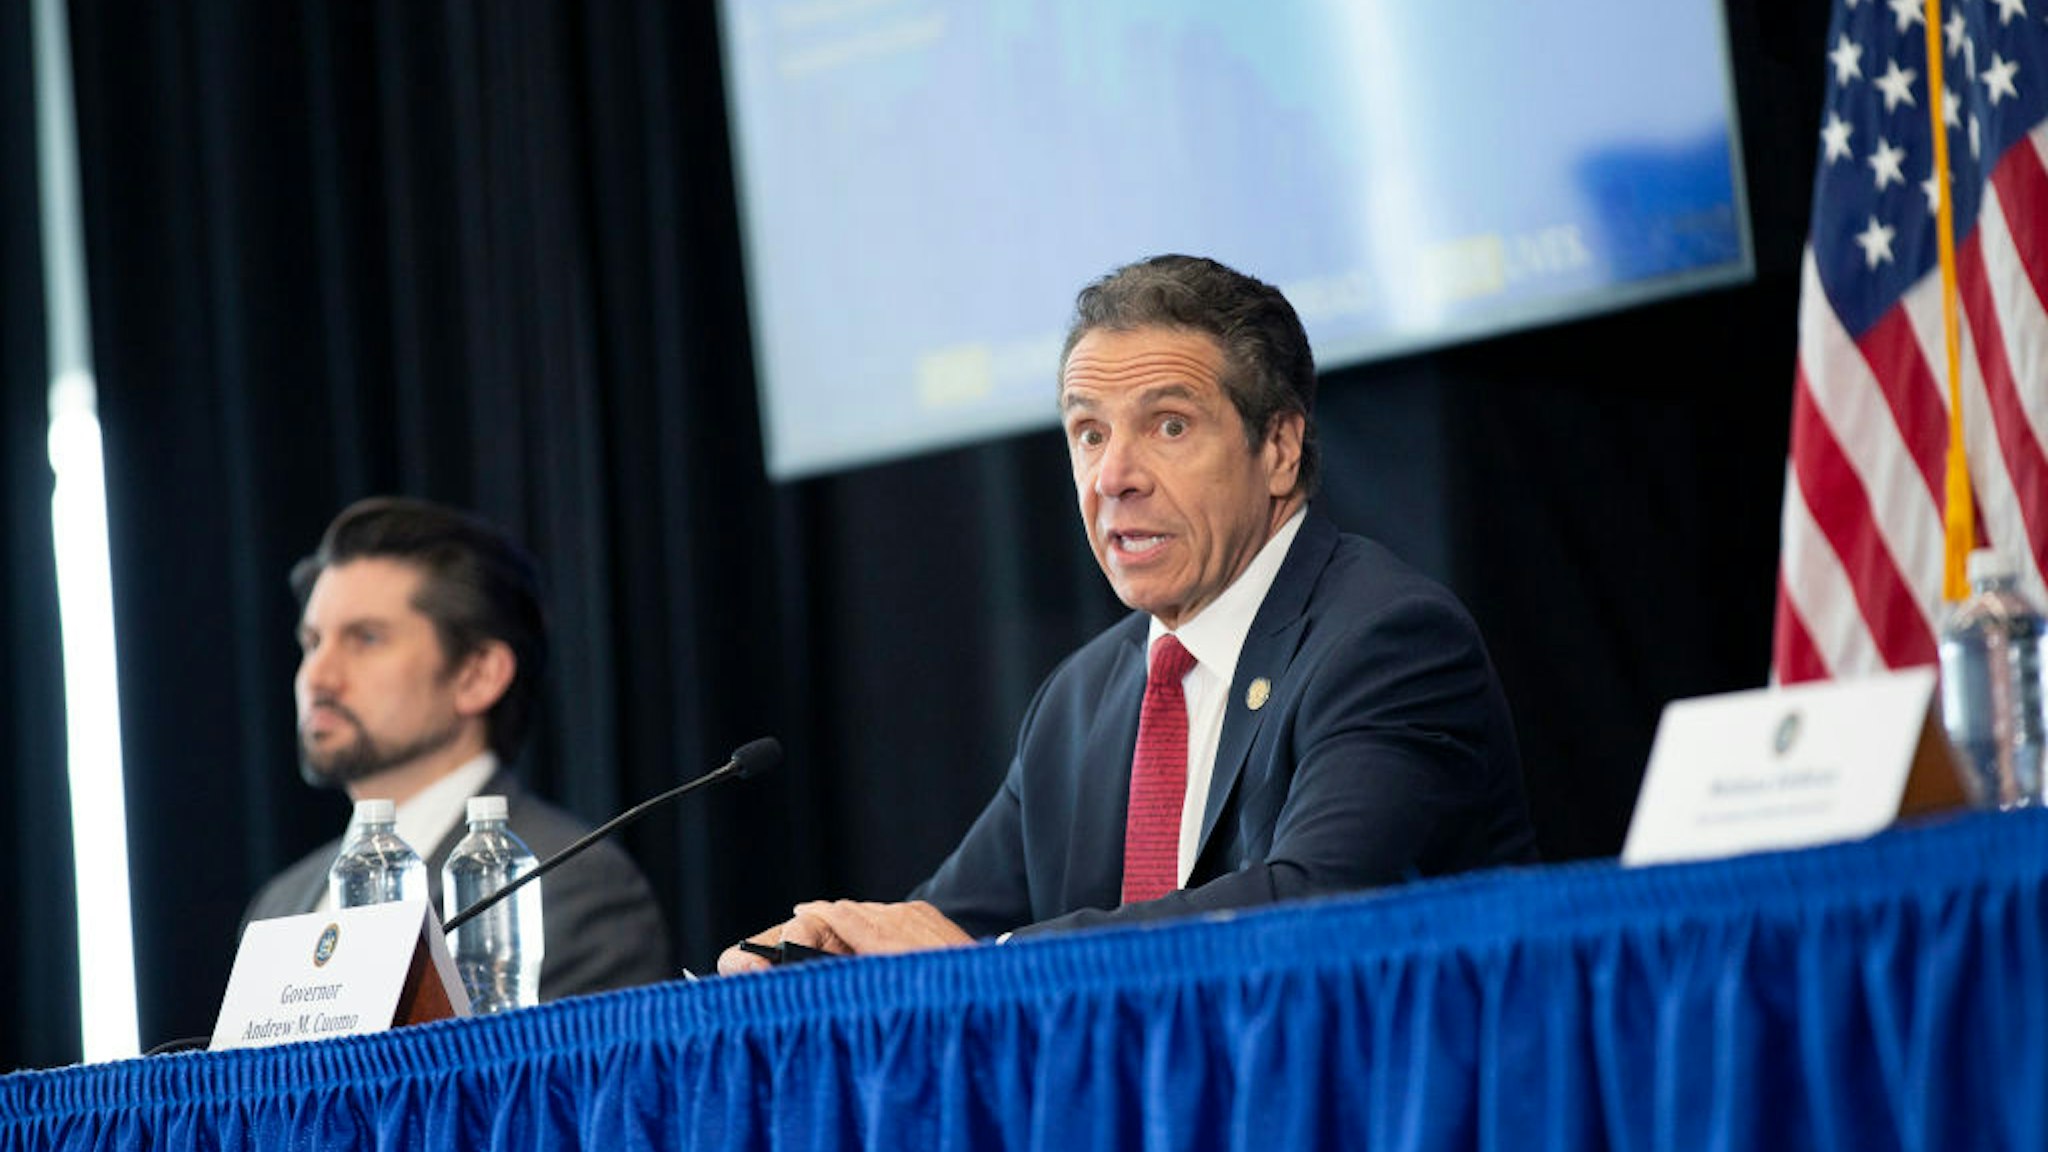 New York State Governor Andrew Cuomo speaks during his daily Coronavirus press briefing at SUNY Upstate Medical University on April 28, 2020 in Syracuse, New York.